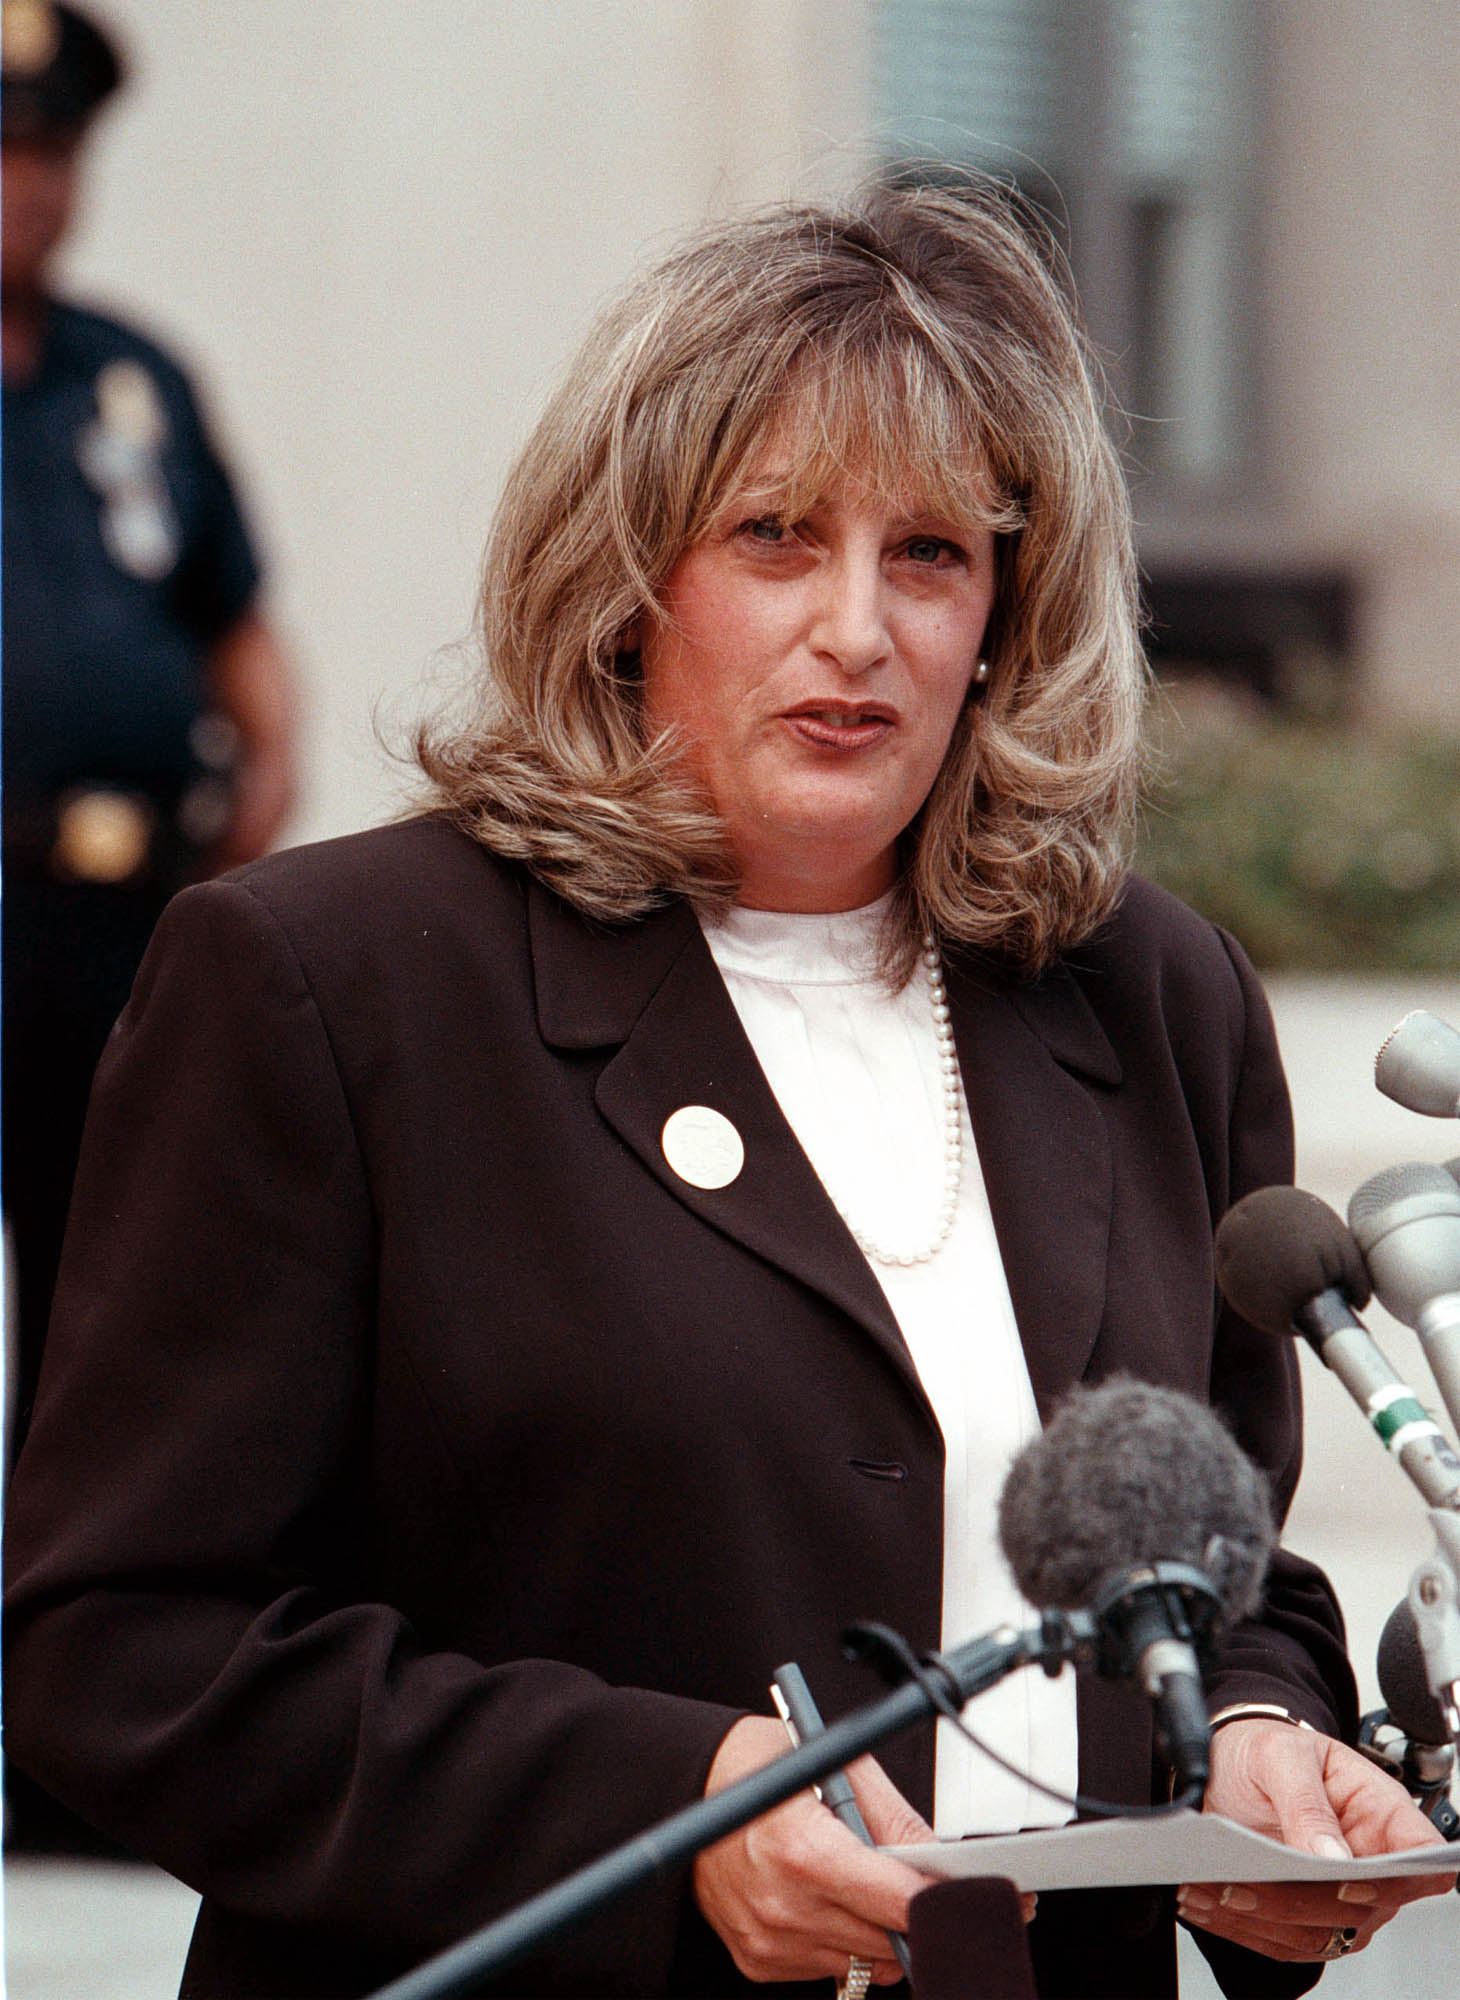 Linda Tripp speaking to the press outside the Federal Courthouse on July 29, 1998